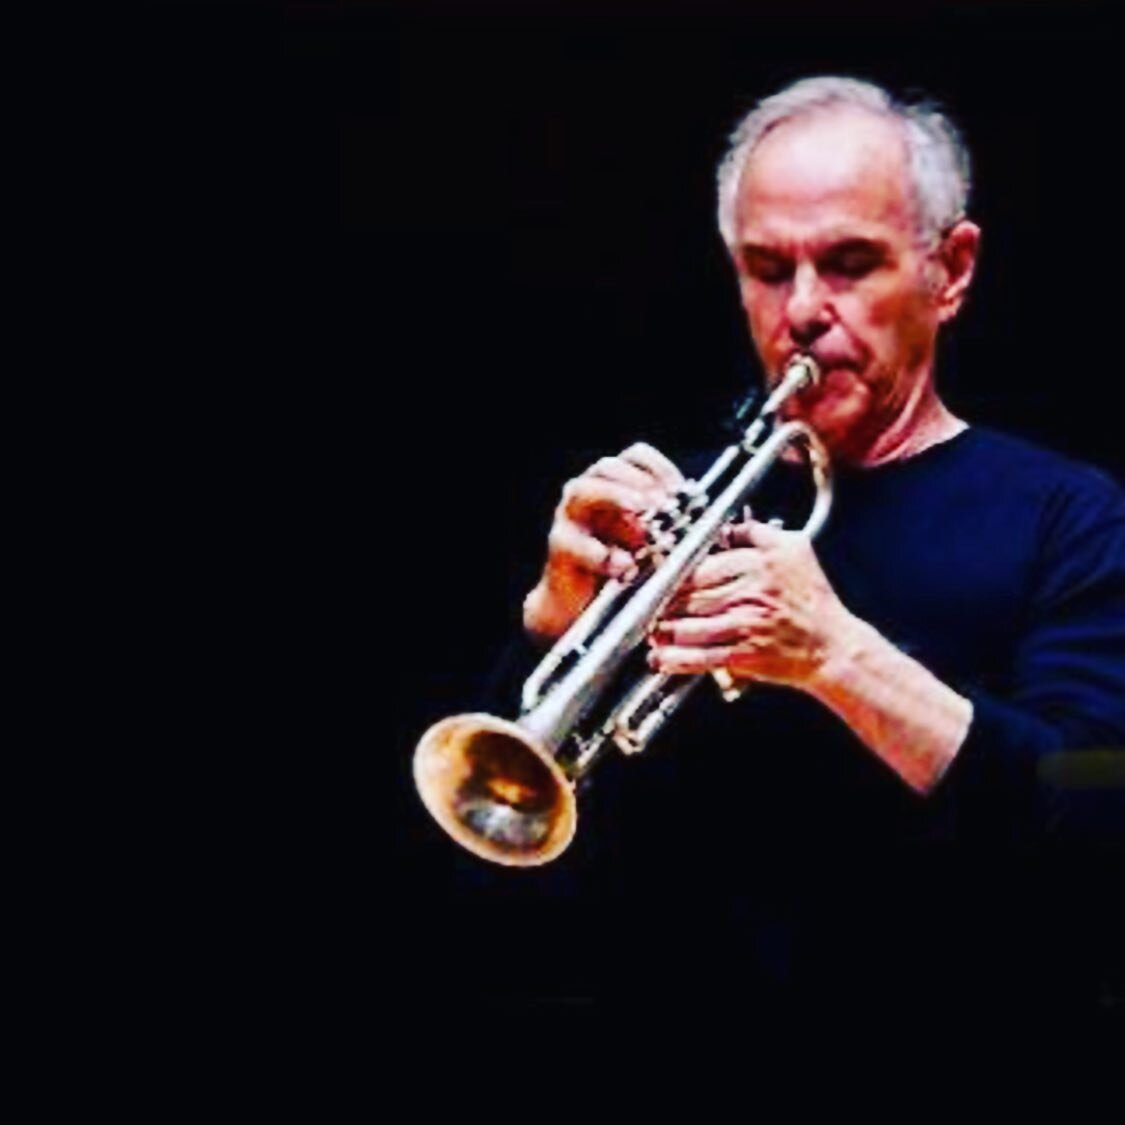 Fairfaxian Mario Guarneri, renowned trumpet-player, runs his company @the_berp from his home! His products, produced locally and made of sustainable materials, help musicians better at what they do. 🎺🎼
.
Mario also teaches at the SF Conservatory an